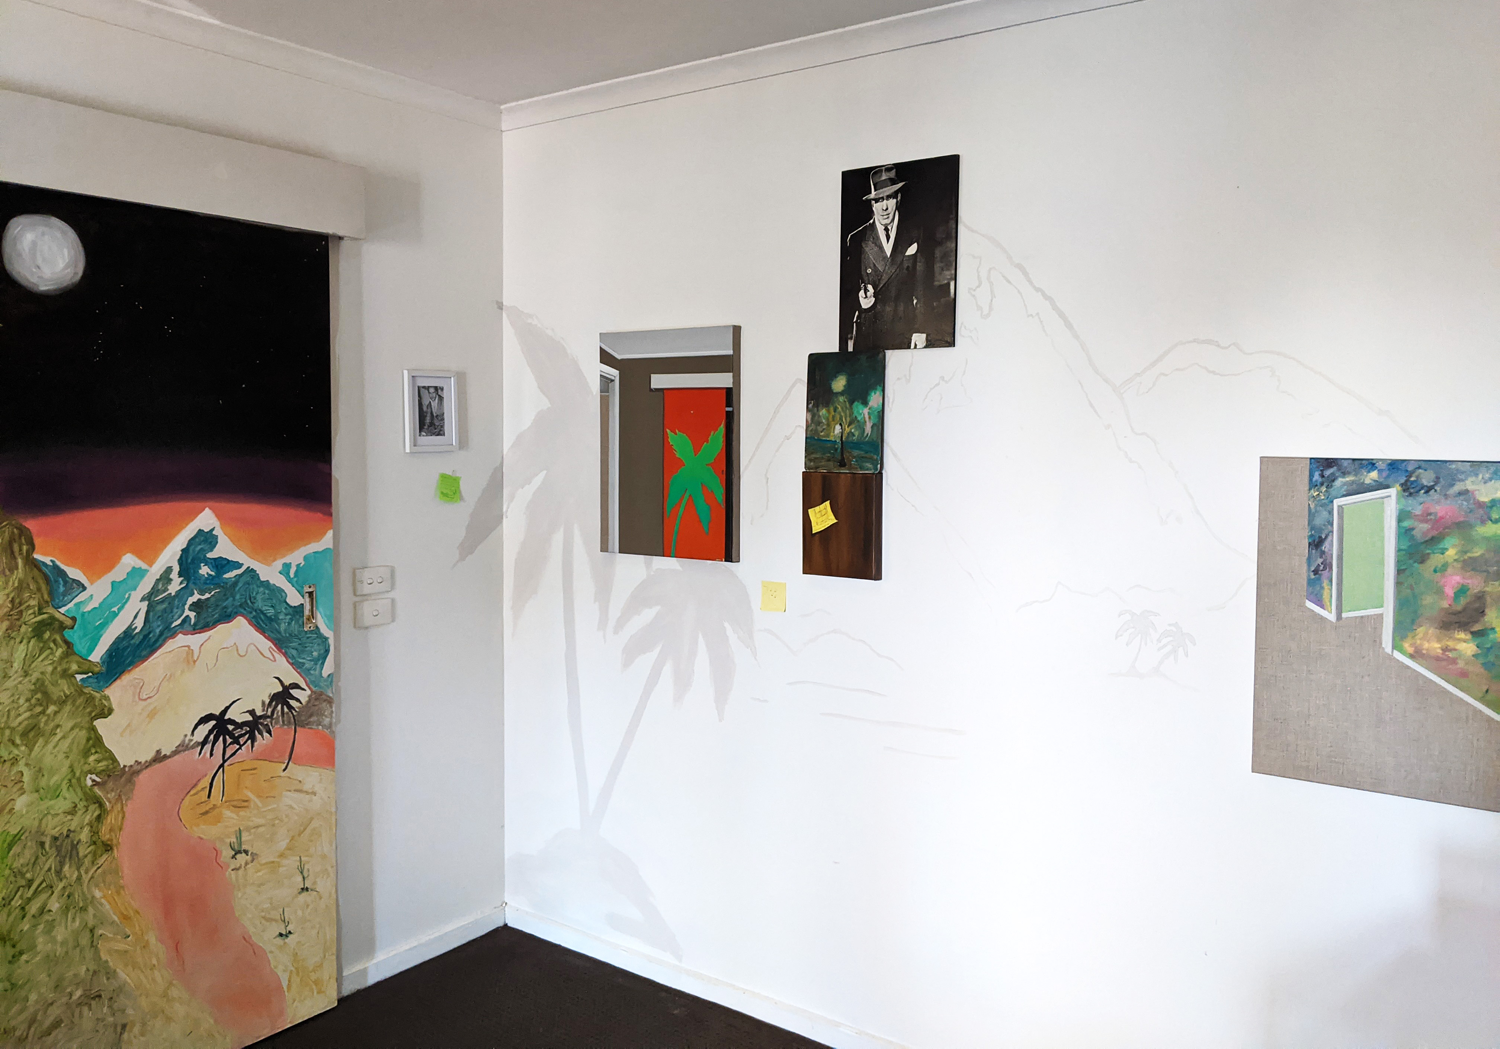 A domestic scene of a landscape explored upon the walls of an individuals home. Shadows of palm trees and mountains are across the wall with collaged images  of another interior space